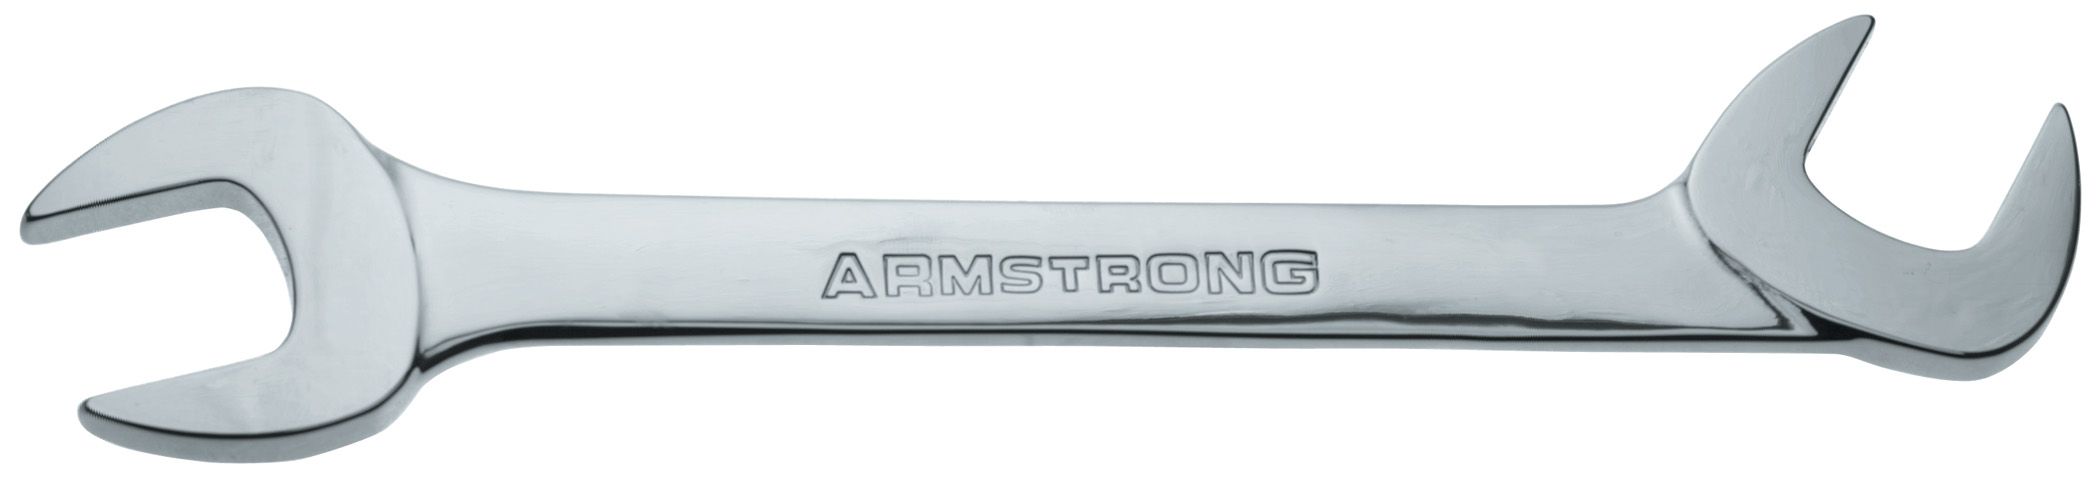 Armstrong 1-5/8 in. Satin Finish 15&deg; and 60&deg; Open End Angle Wrench